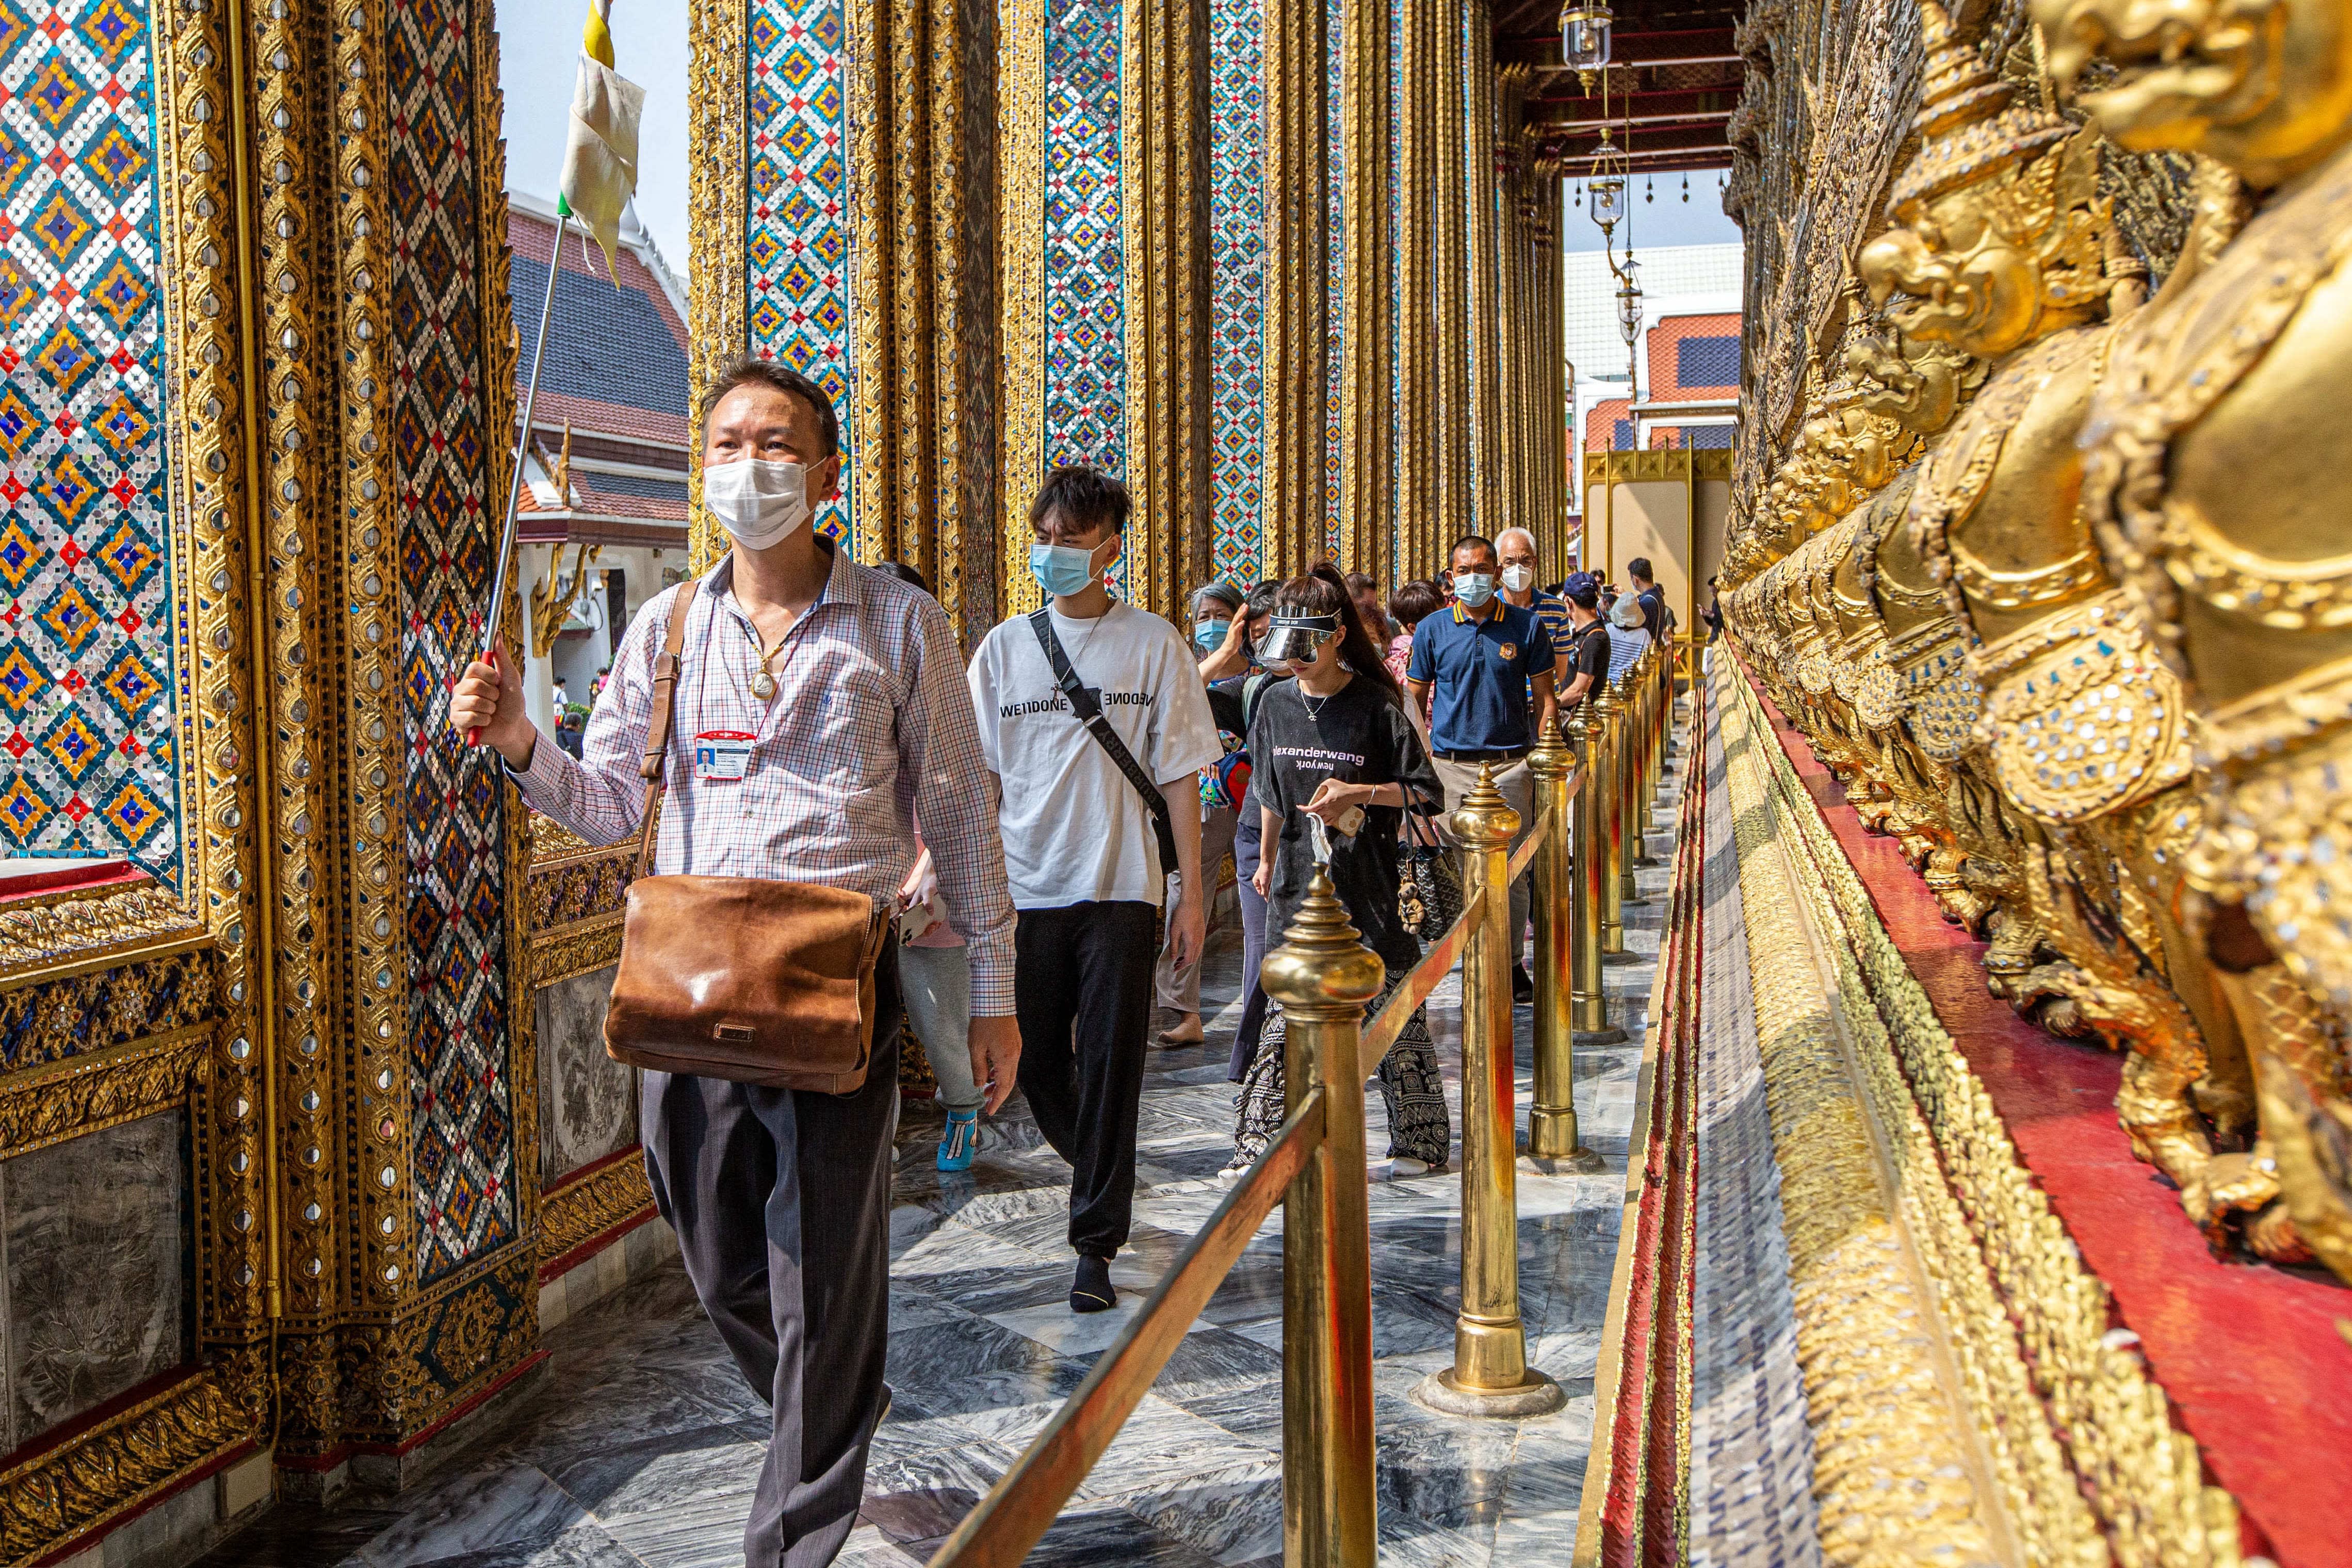 Where are Chinese travelers going? Thailand and more in Southeast Asia